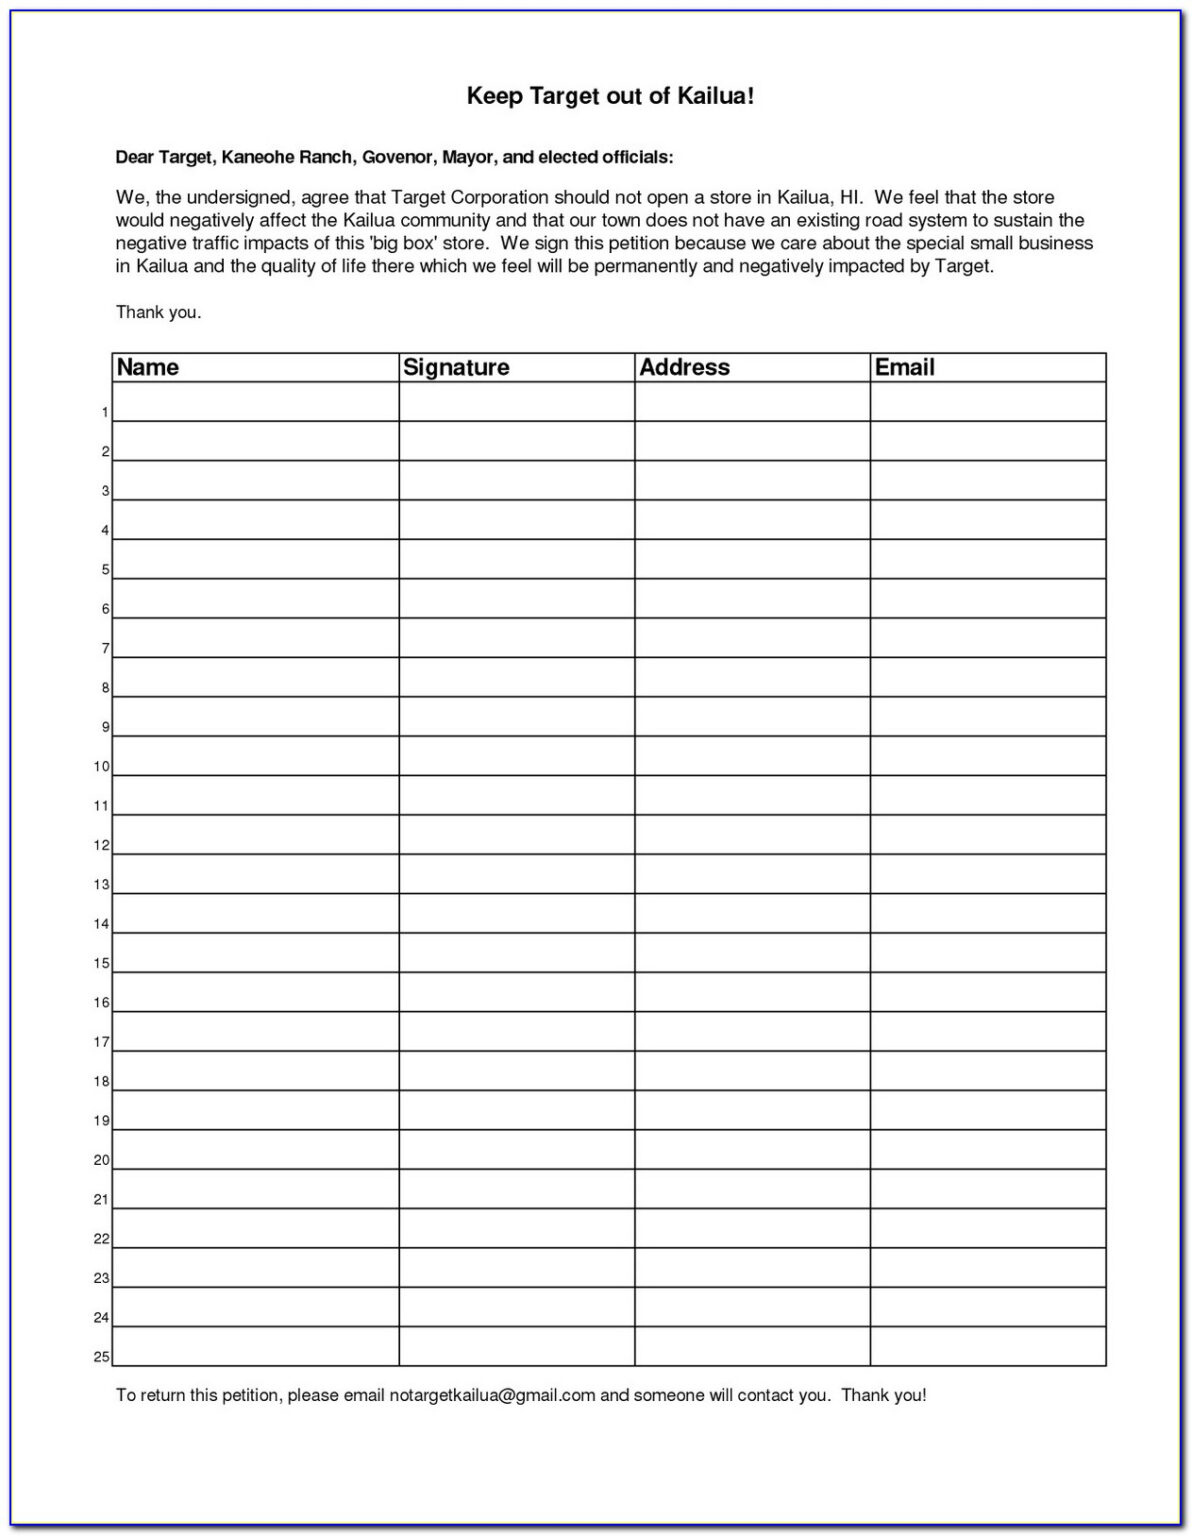 free-petition-forms-templates-form-resume-examples-throughout-blank